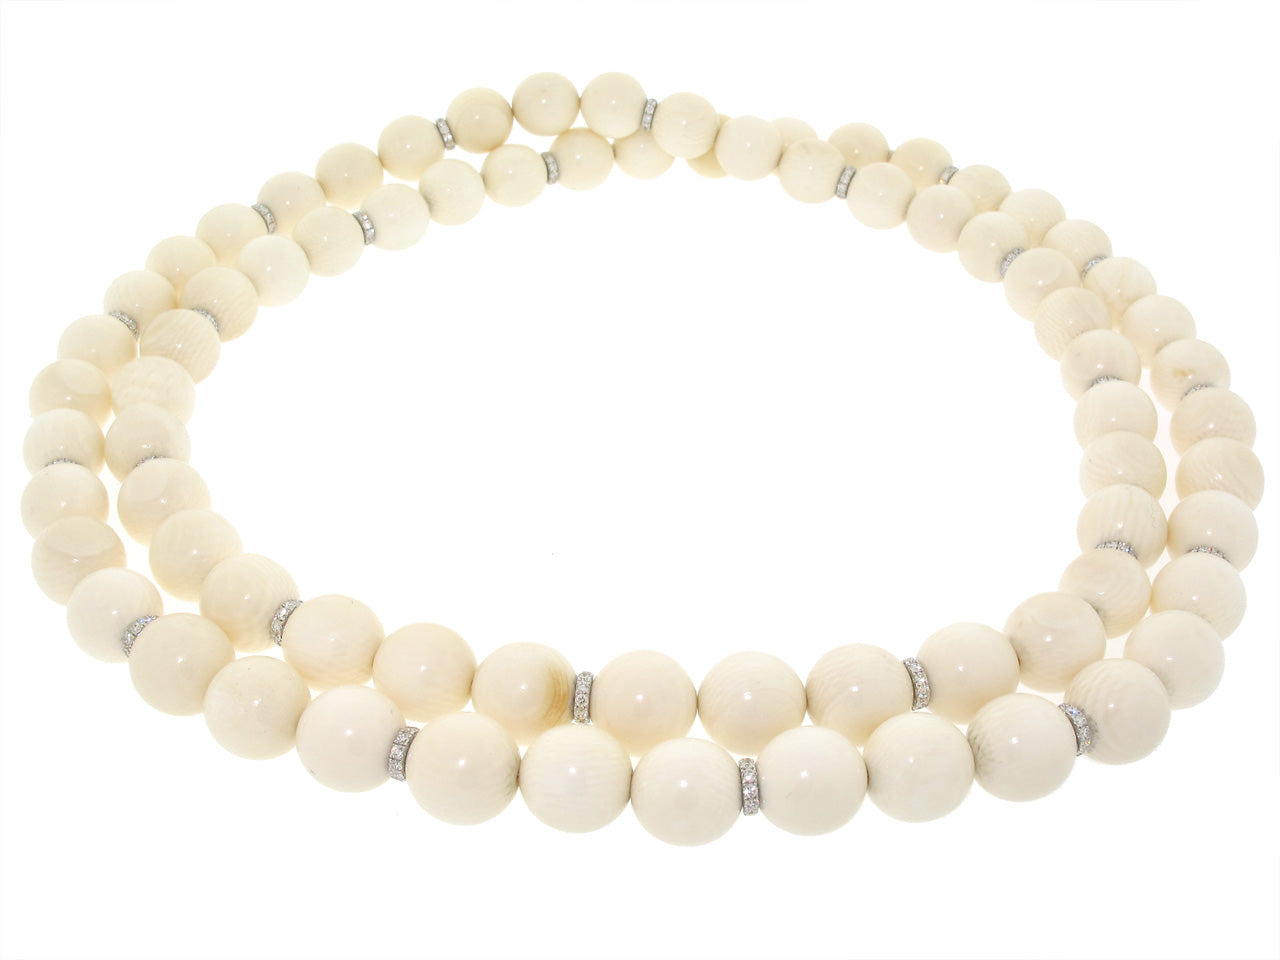 Bone and Diamond Bead Necklace in 18K